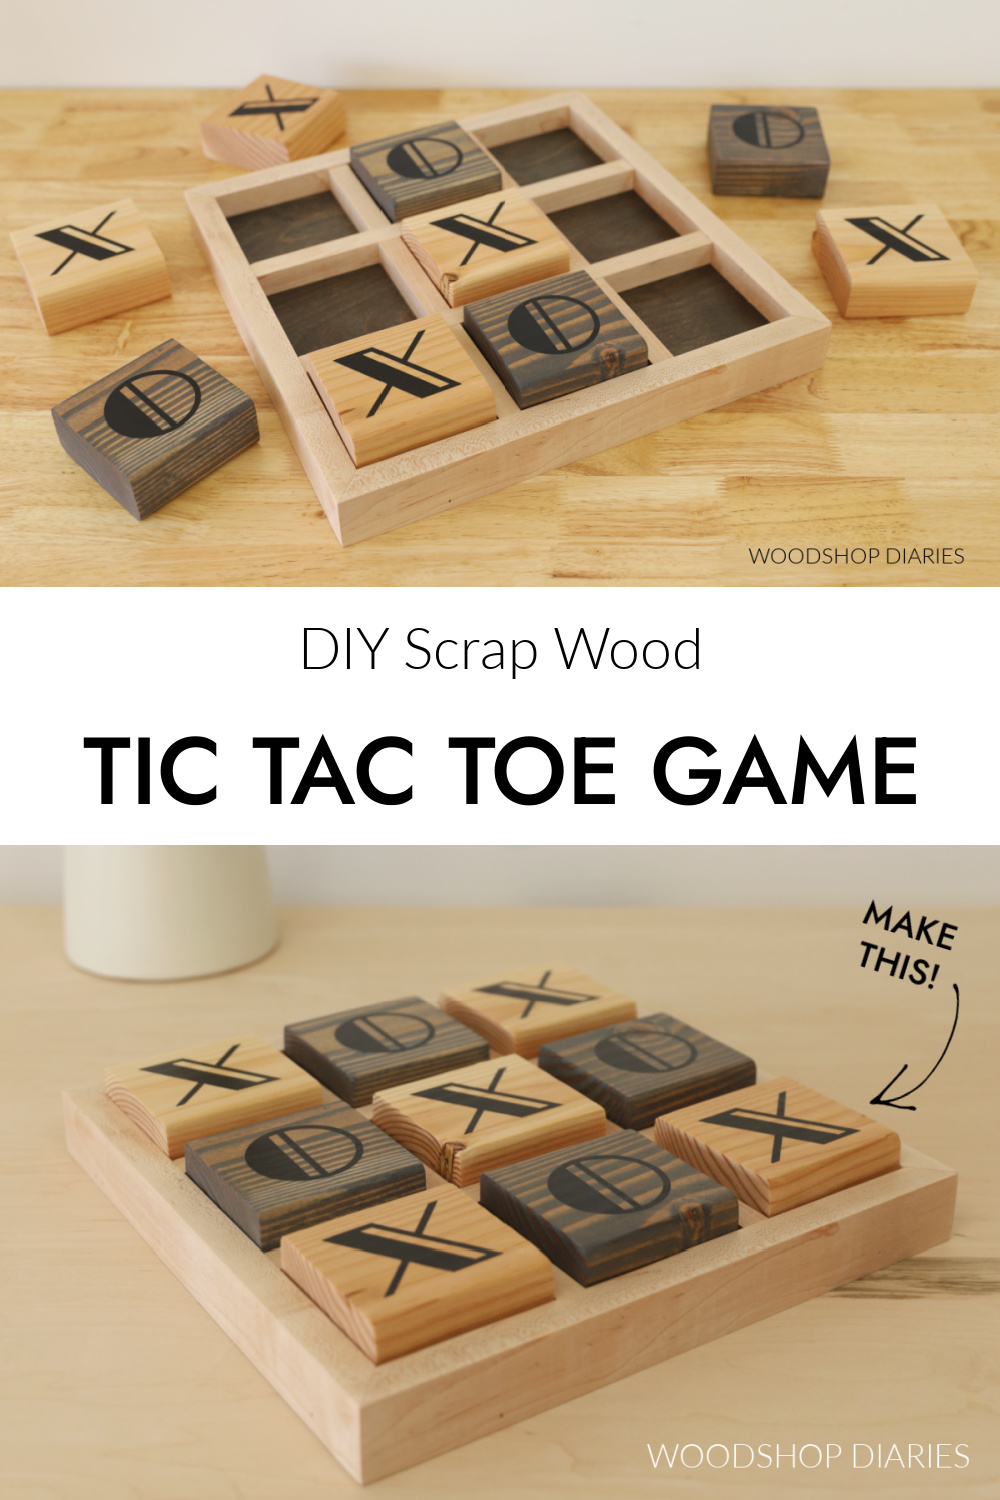 Pinterest collage image showing DIY wooden tic tac toe game at top with pieces scattered around and same board game at bottom with all game pieces in place. Text in the middle "DIY scrap wood tic tac toe game"